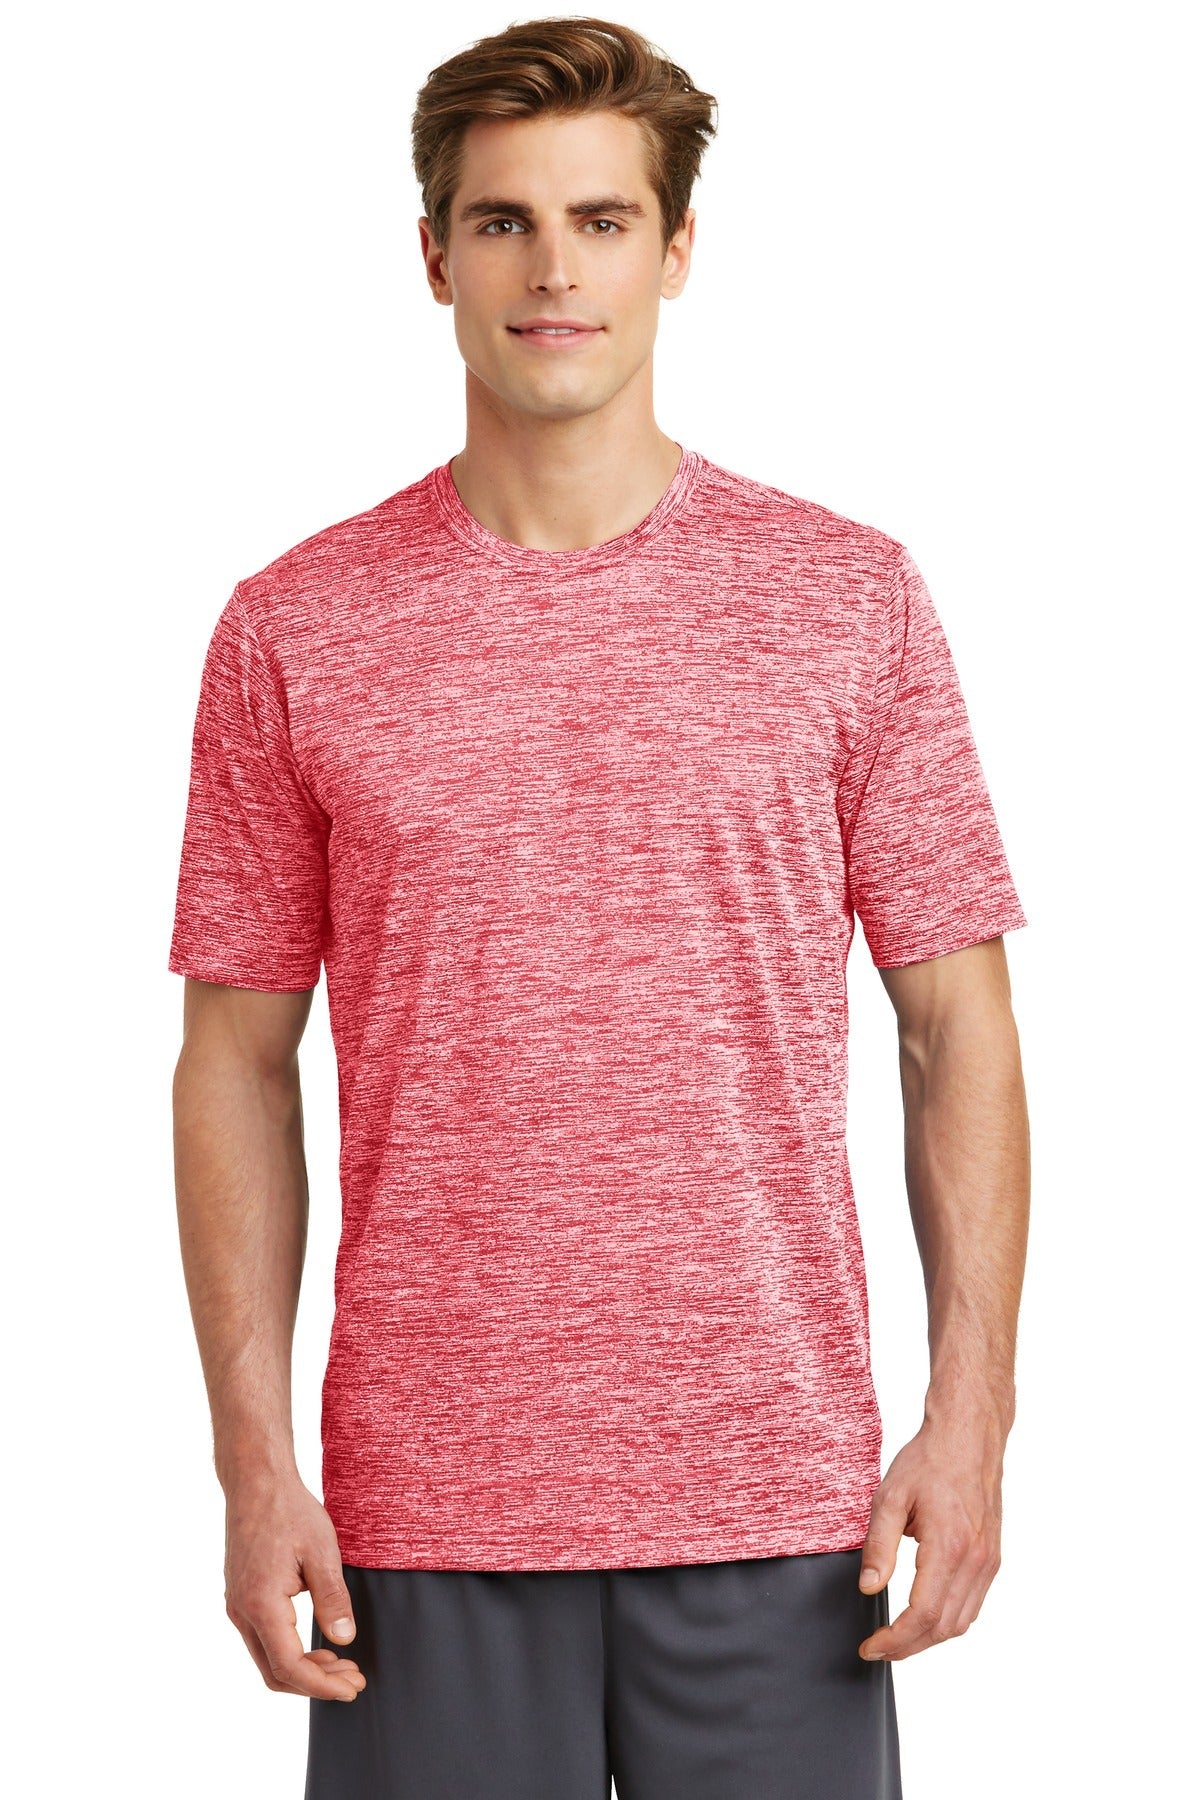 Sport-Tek® PosiCharge® Electric Heather Tee. ST390 [Deep Red Electric] - DFW Impression